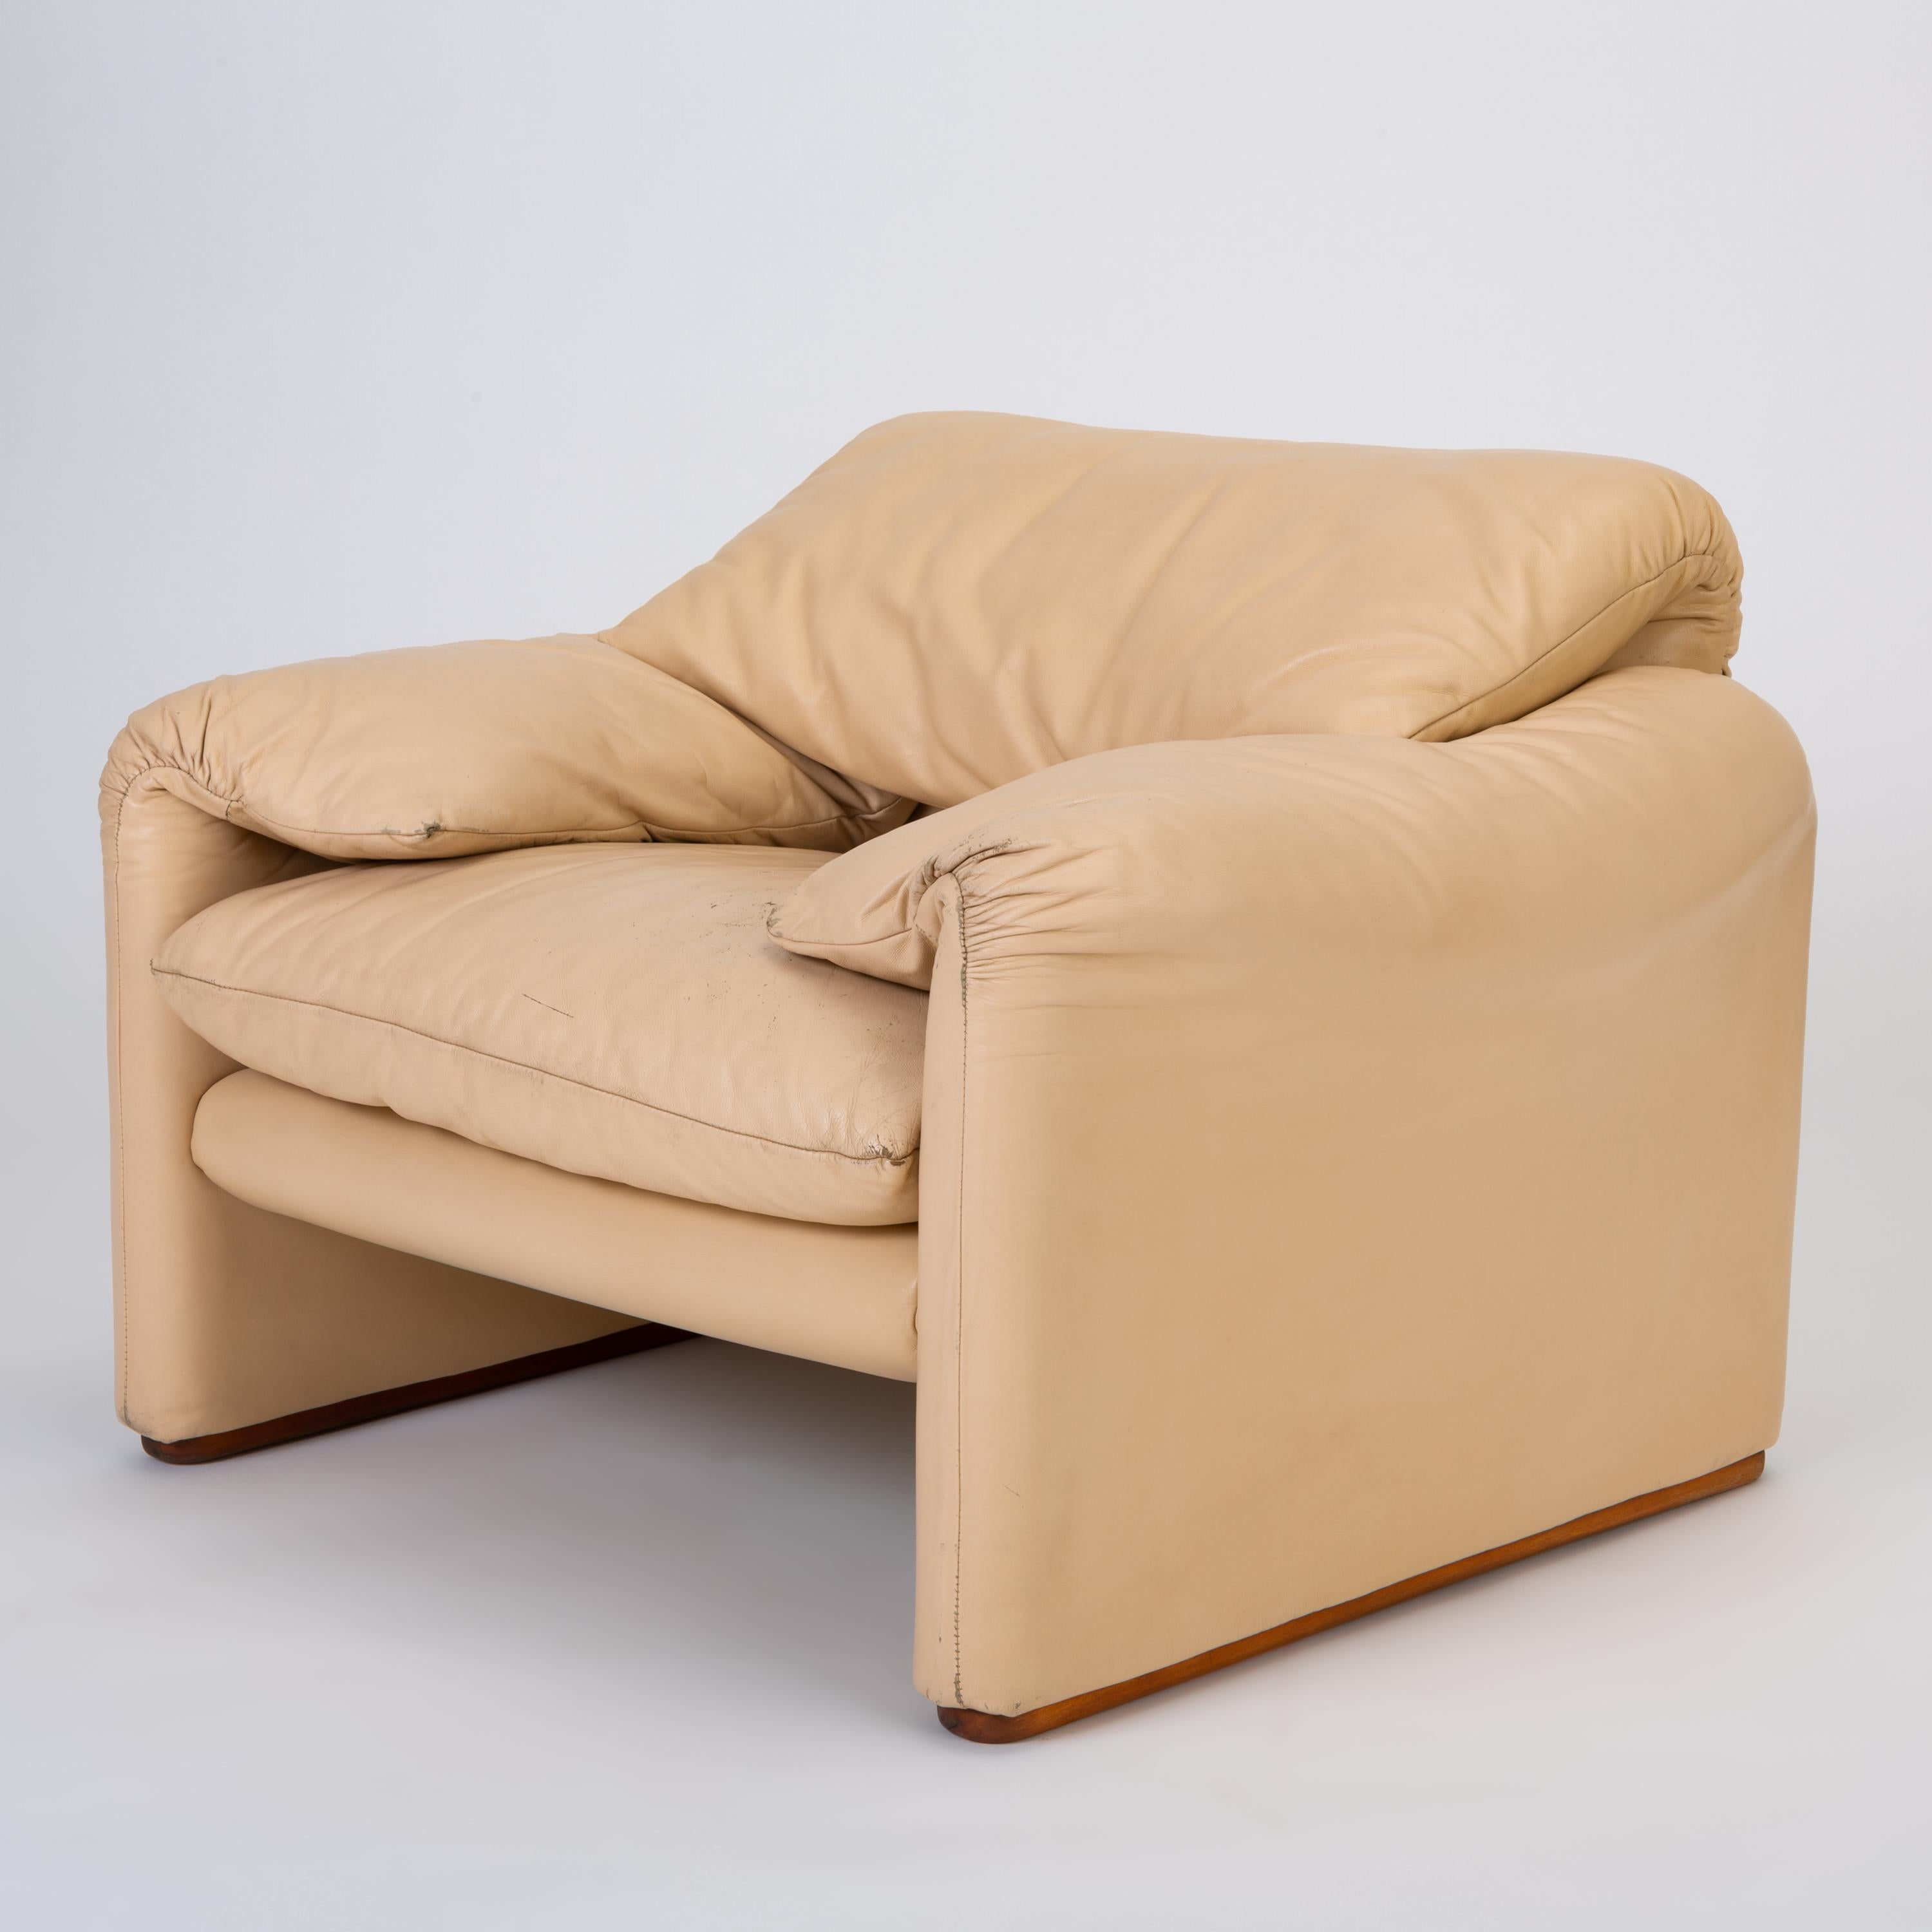 Late 20th Century Leather “Maralunga” Chair by Vico Magistretti for Cassina